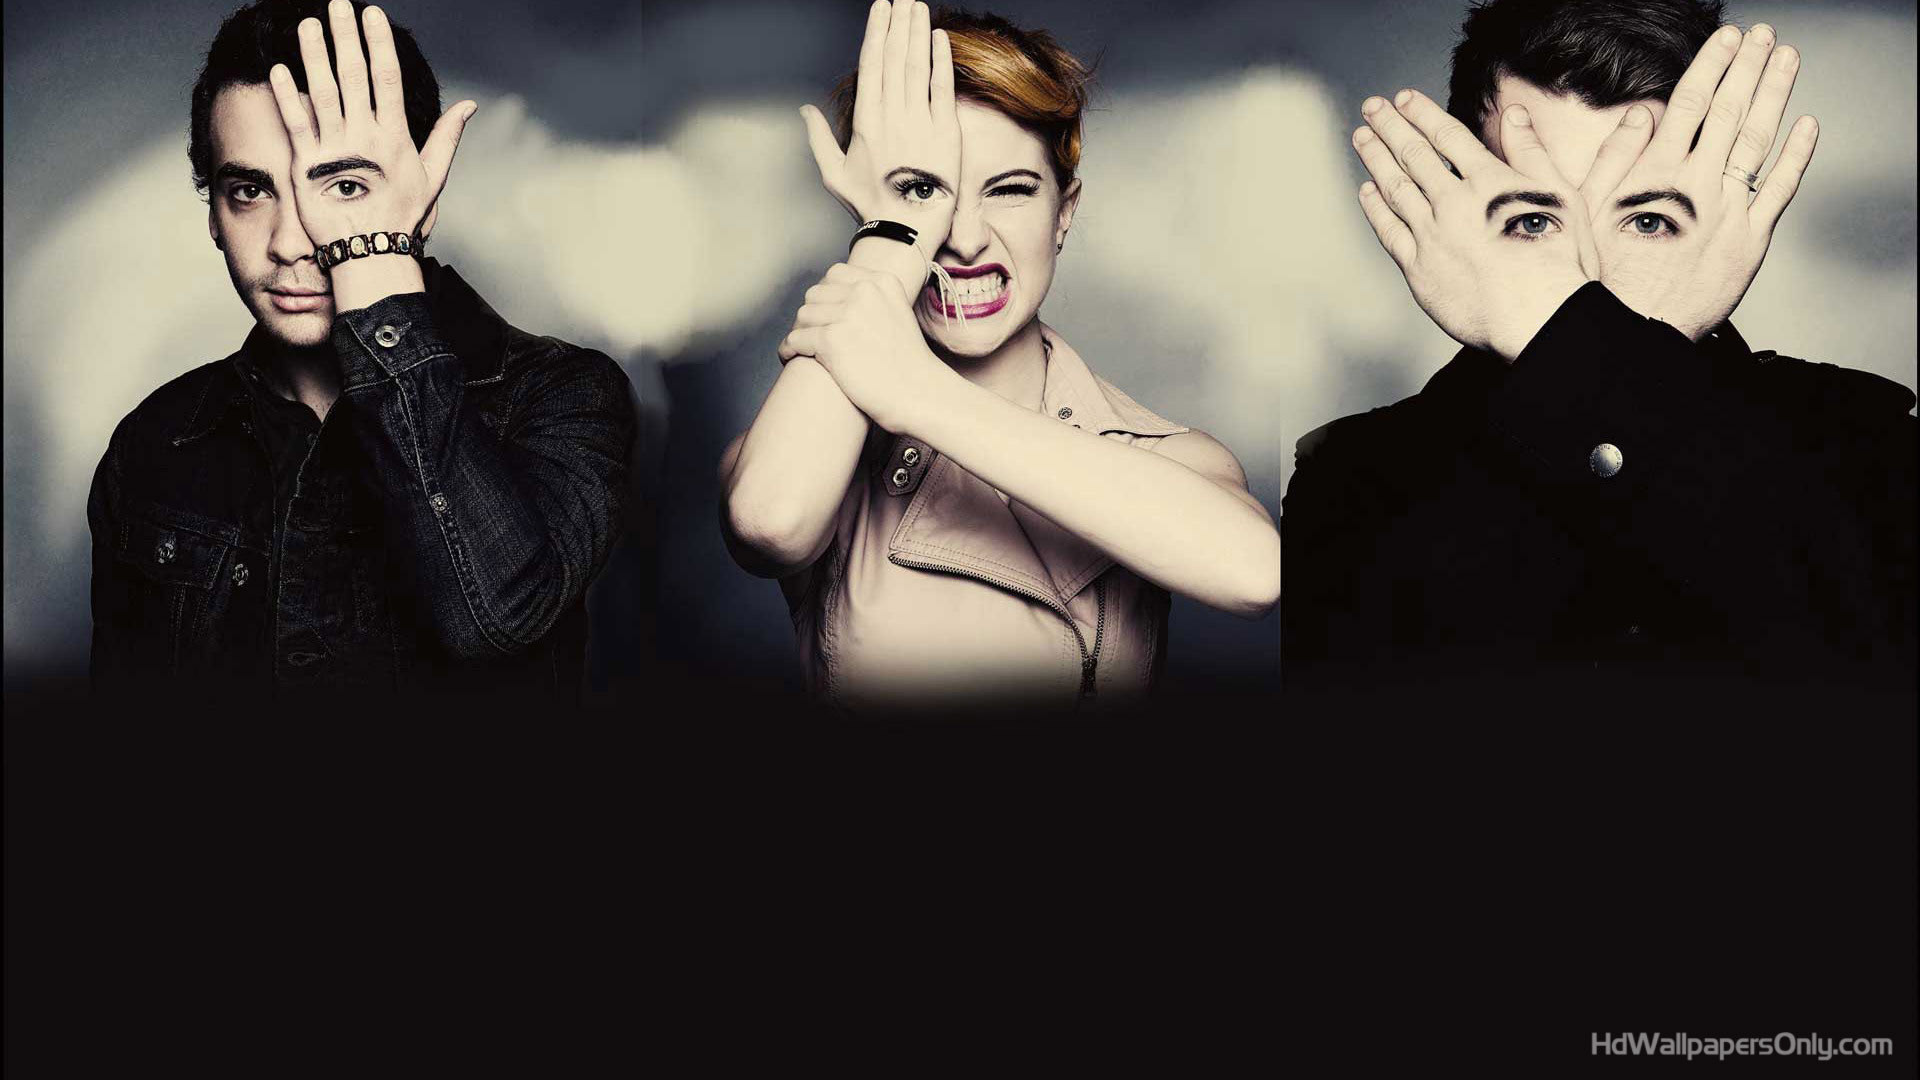 1920x1080 Paramore images Paramore HD wallpaper and background photos